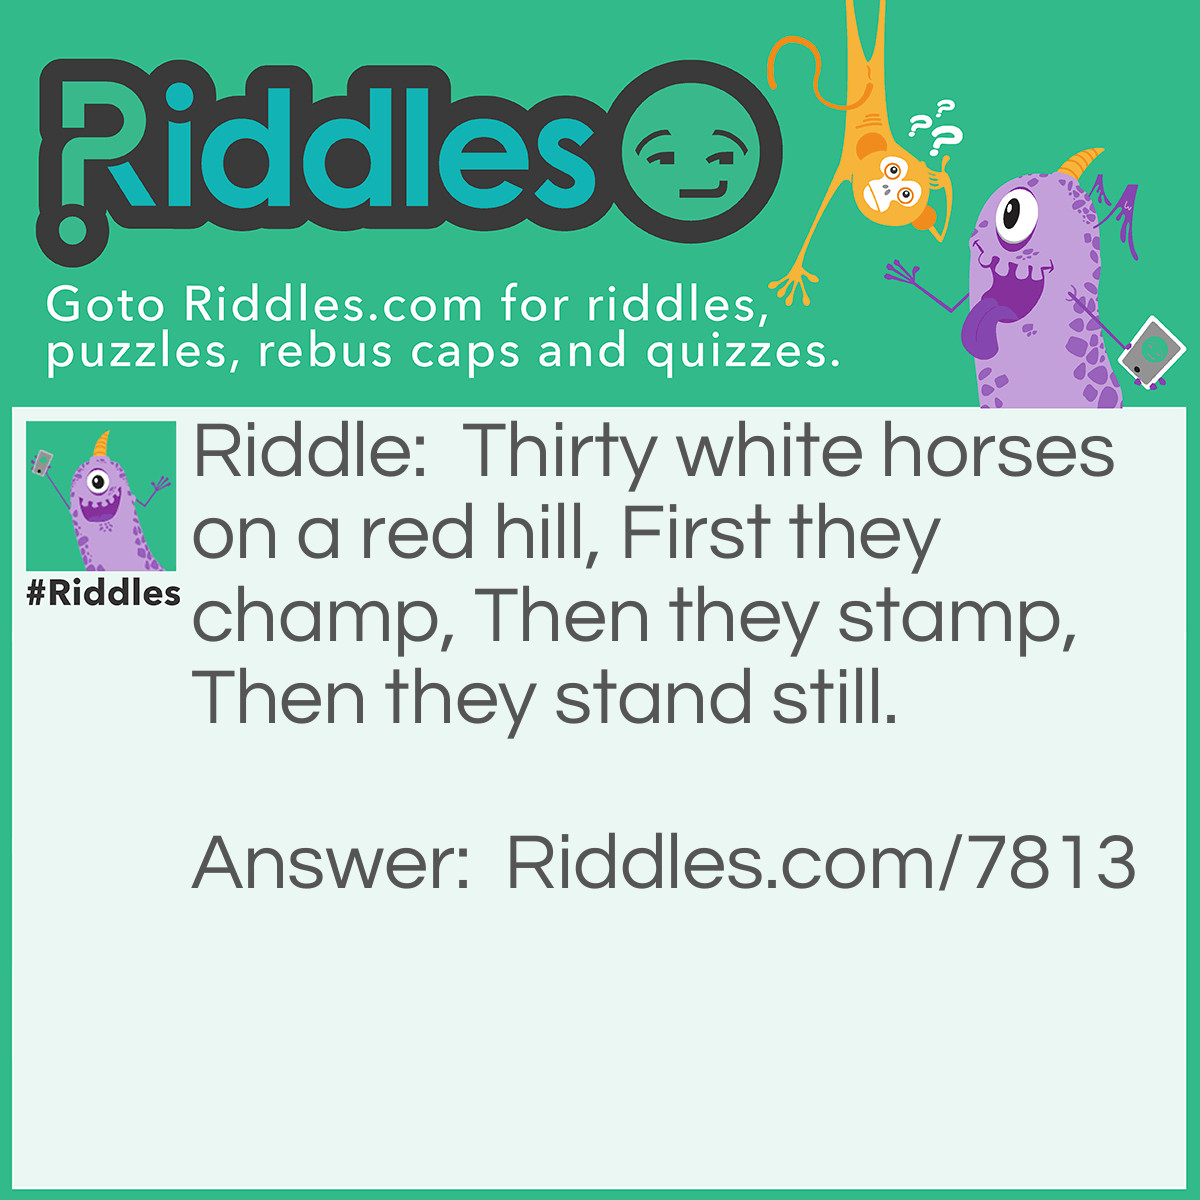 Riddle: Thirty white horses on a red hill, First they champ, Then they stamp, Then they stand still. Answer: Teeth